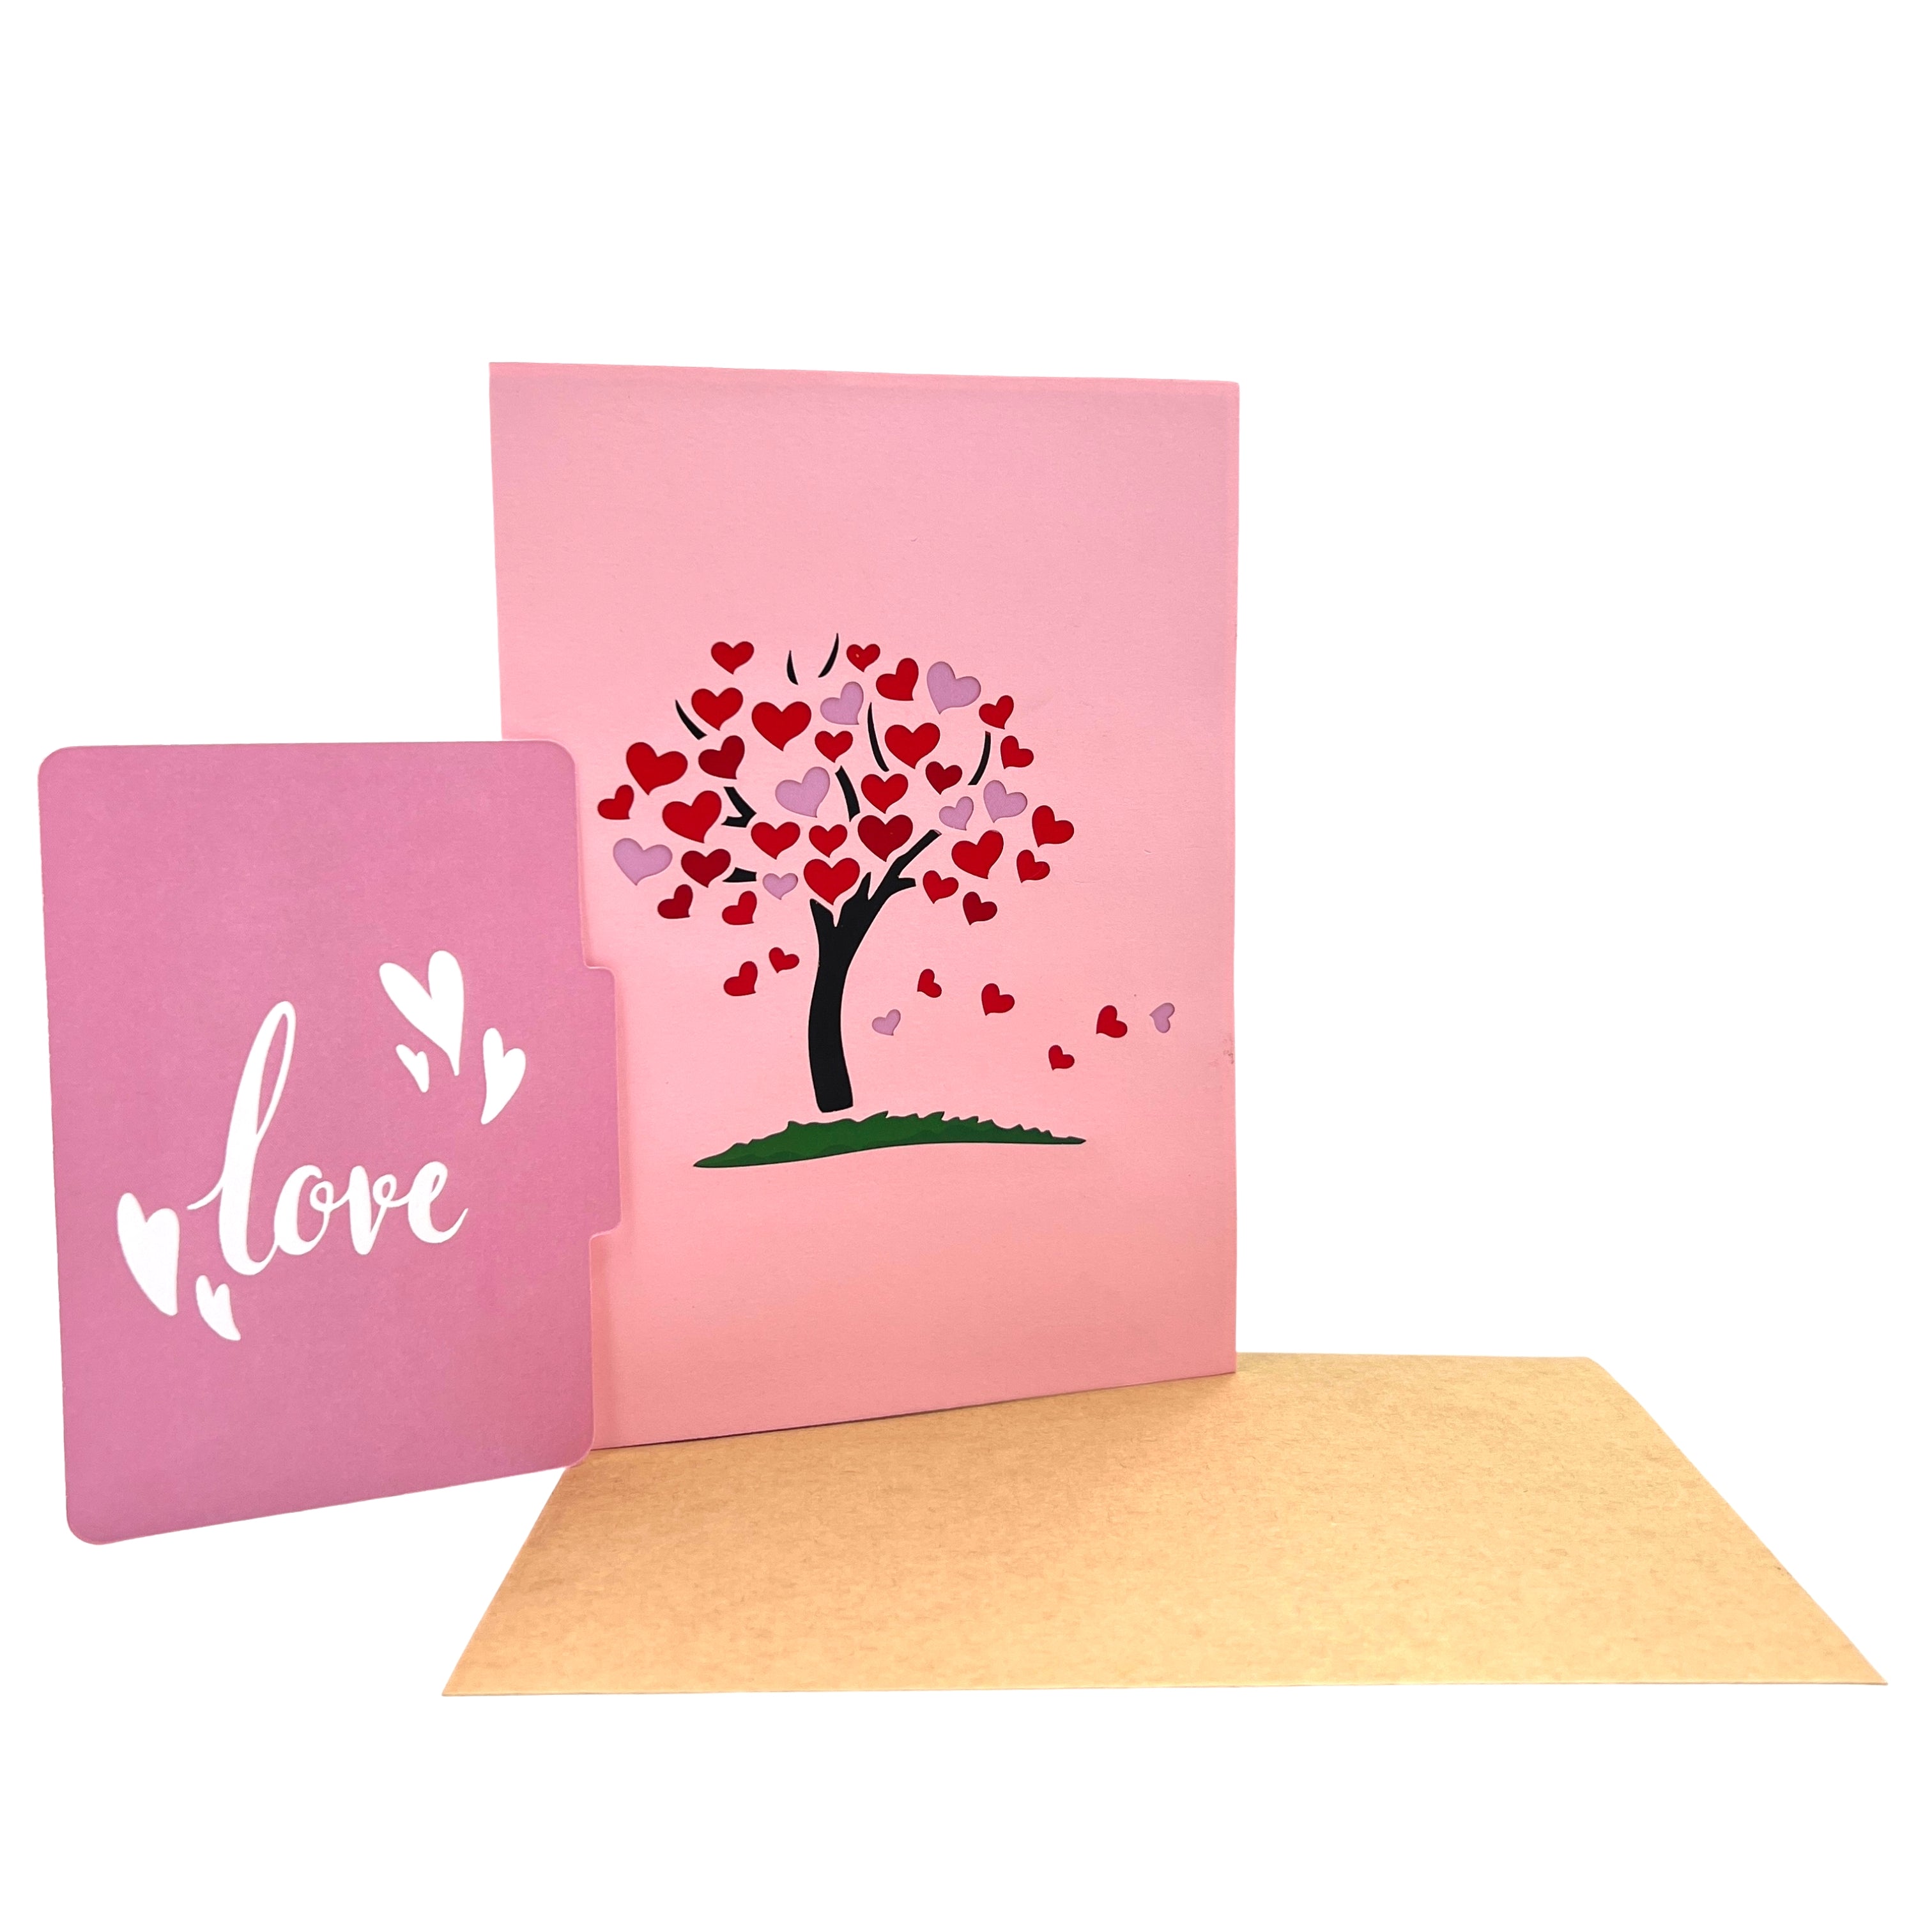 Pop Up Greeting Card Tree of Endless Love Wedding Card Invitation Wedding Gift Engagement Elopement Proposal Valentine Gift Romantic Card